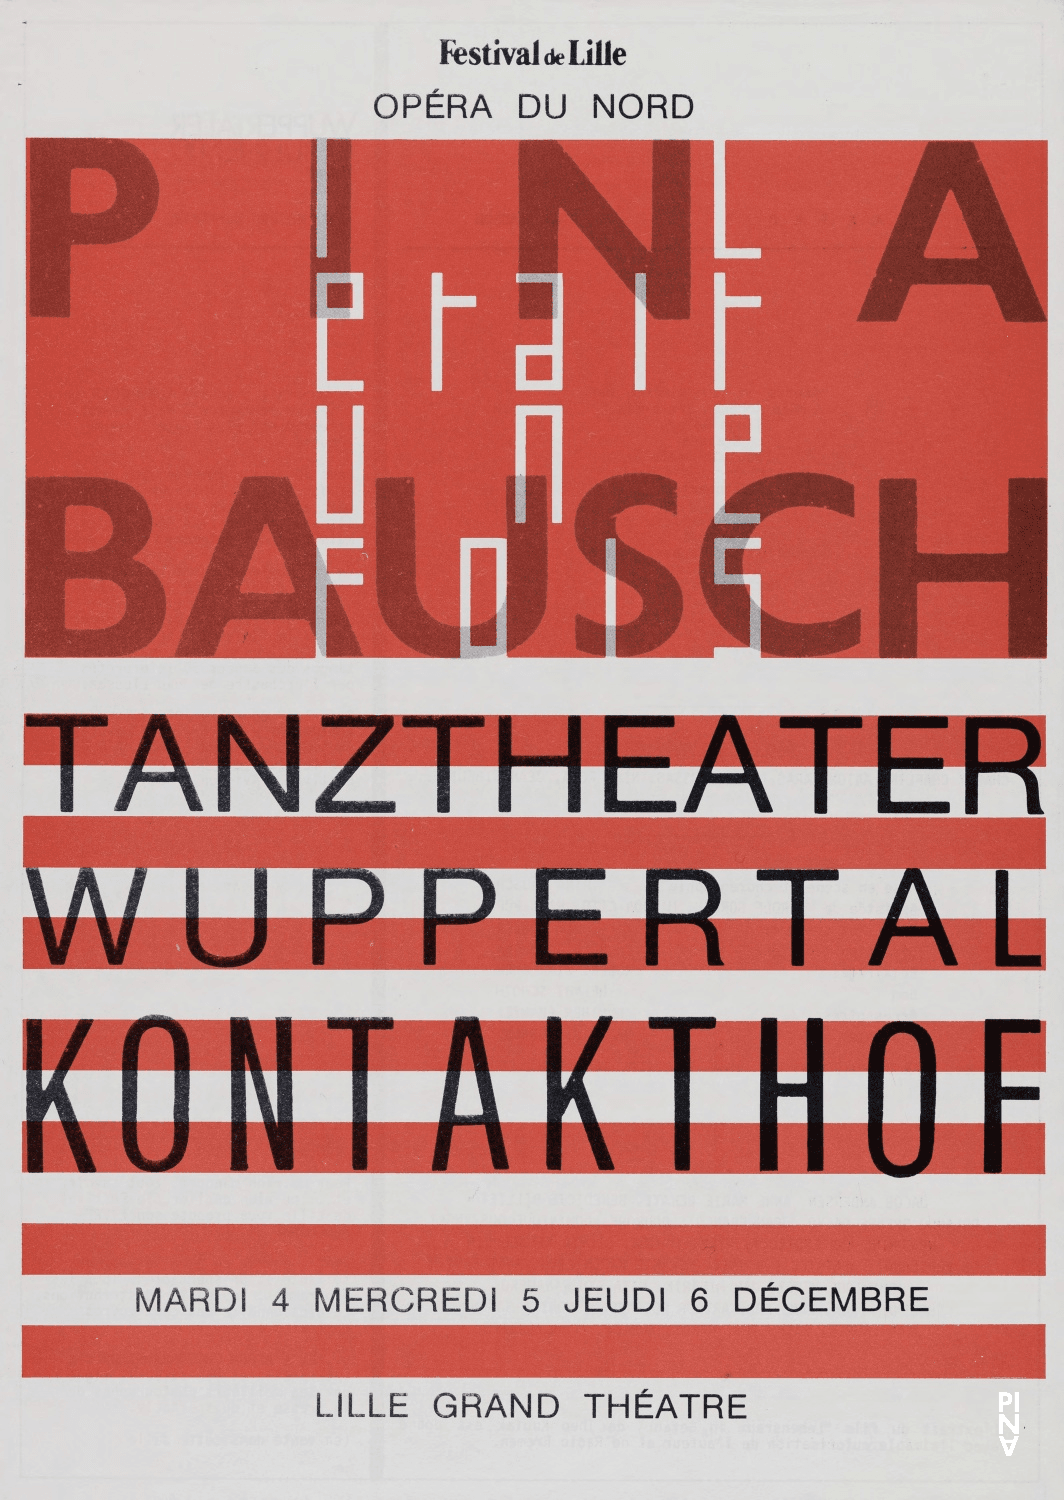 Evening leaflet for “Kontakthof” by Pina Bausch with Tanztheater Wuppertal in in Lille, 12/04/1984 – 12/06/1984